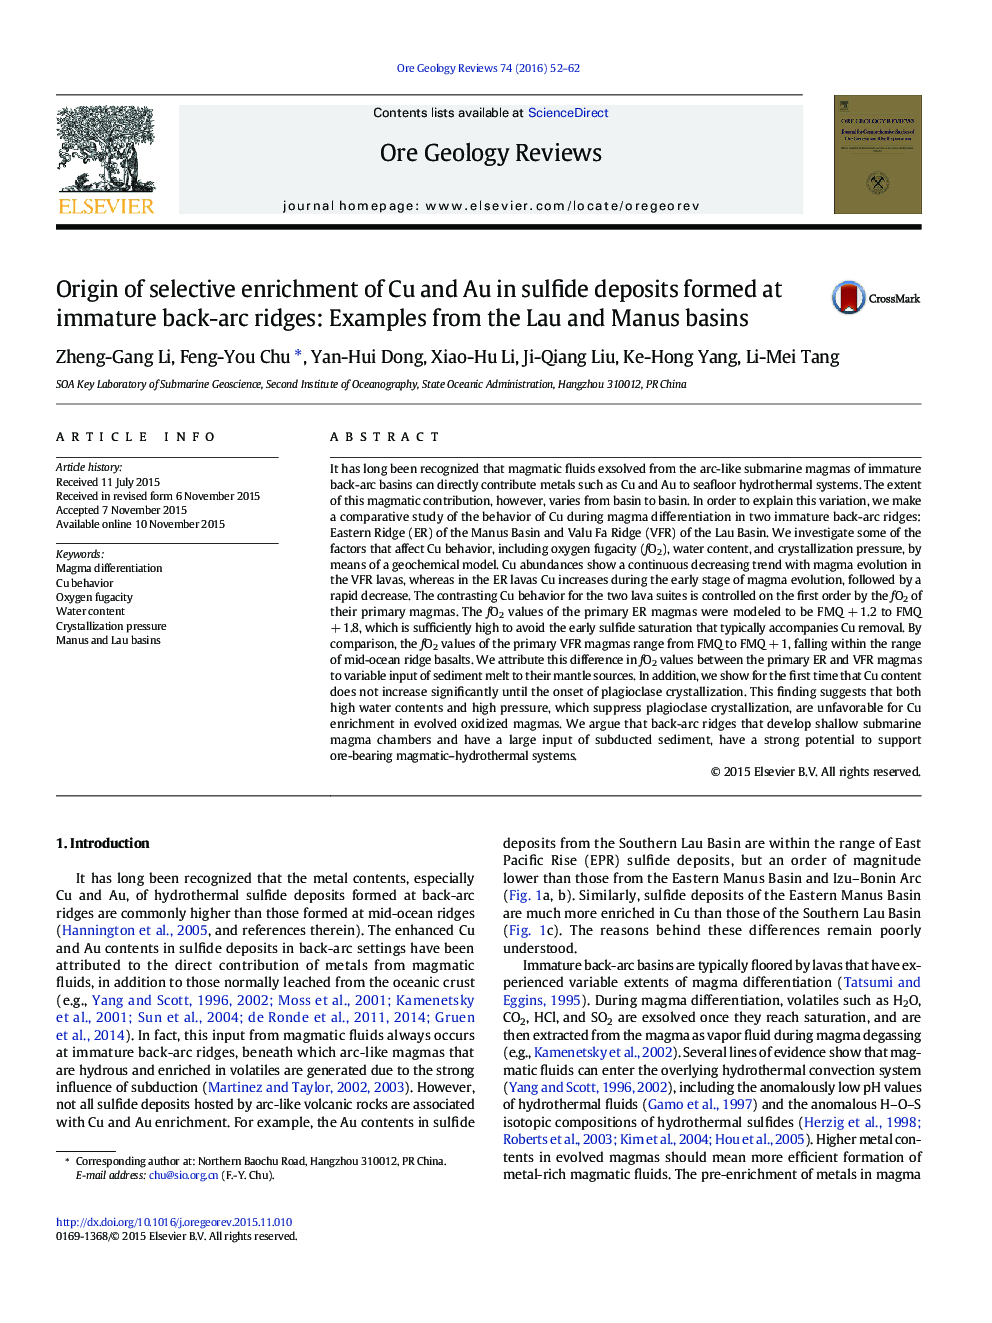 Origin of selective enrichment of Cu and Au in sulfide deposits formed at immature back-arc ridges: Examples from the Lau and Manus basins